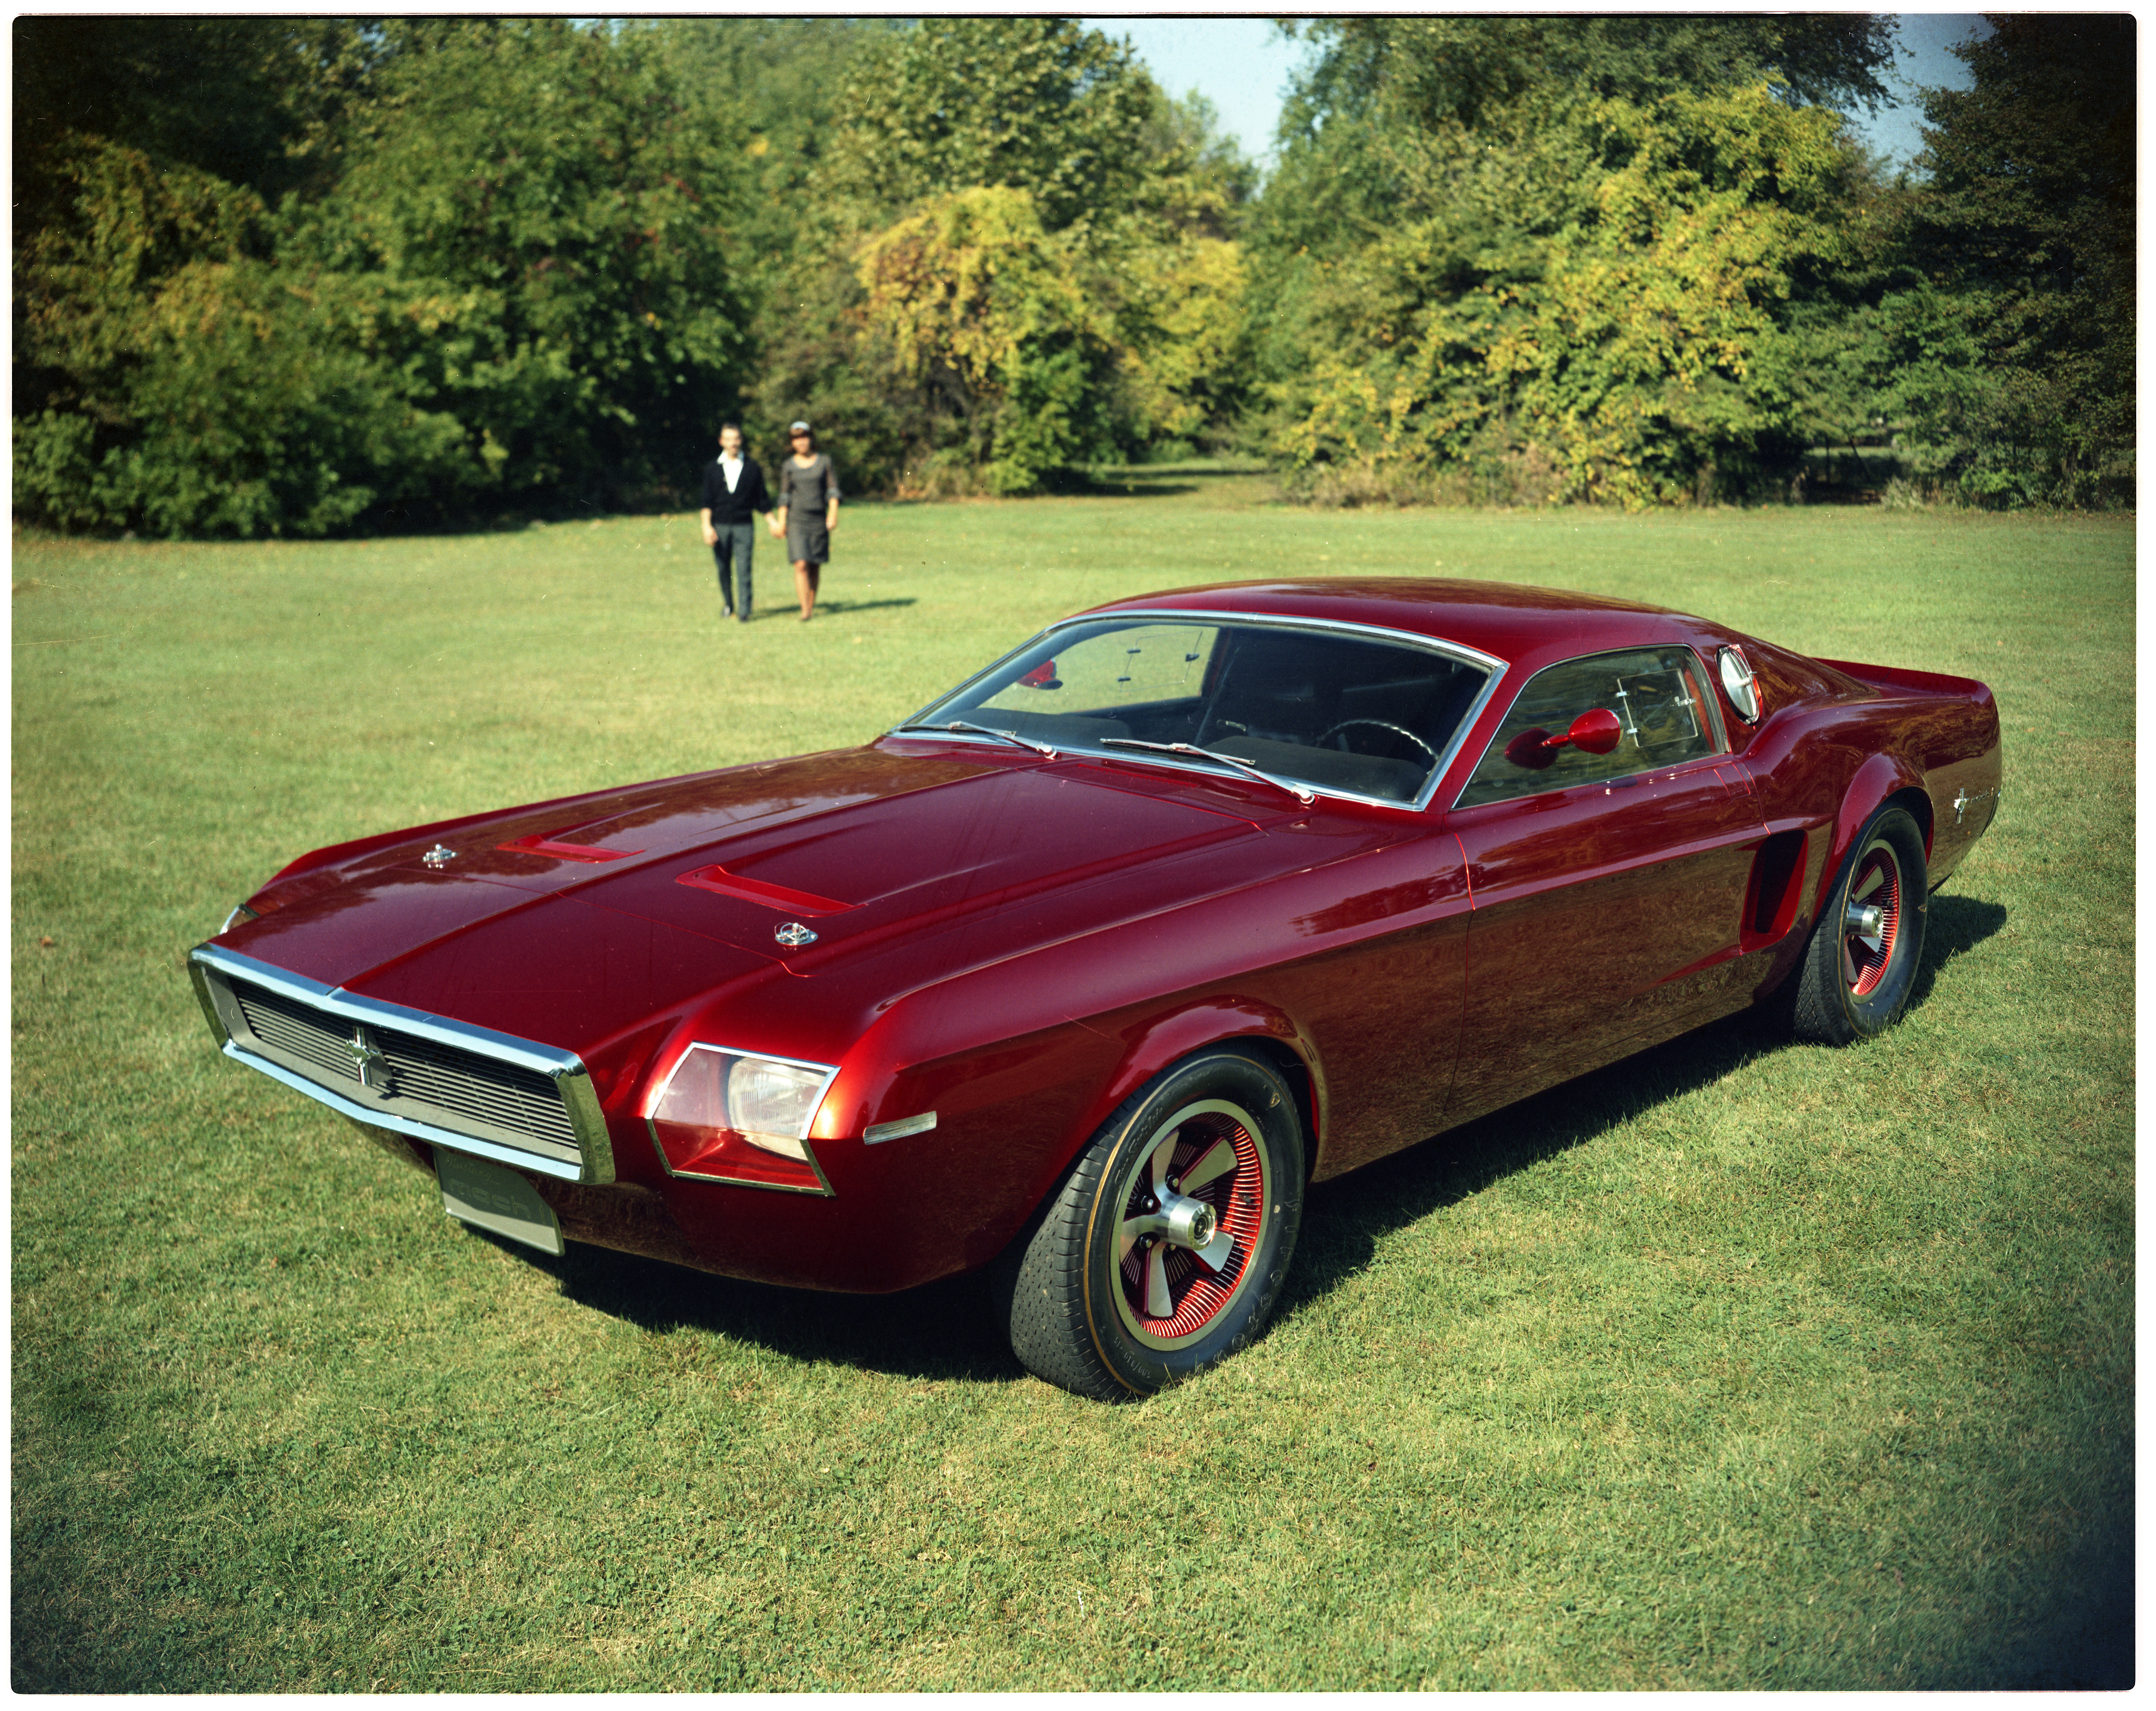 Ford Mustang Mach I Backgrounds, Compatible - PC, Mobile, Gadgets| 6099x4840 px